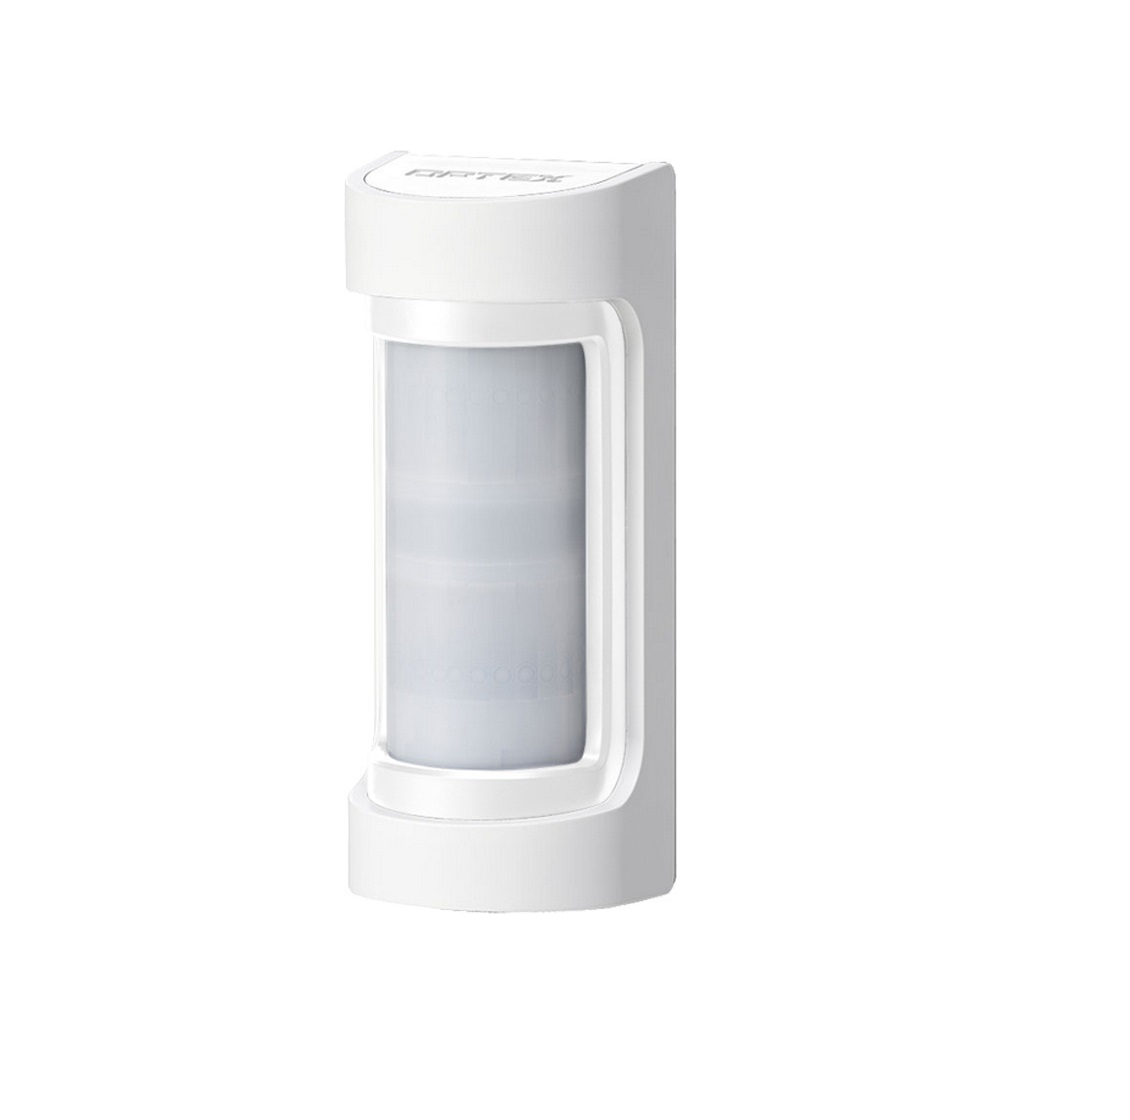 OPTEX VXS-AM (W) Wired Infrared PIR Outdoor Motion Detector, Anti-Masking